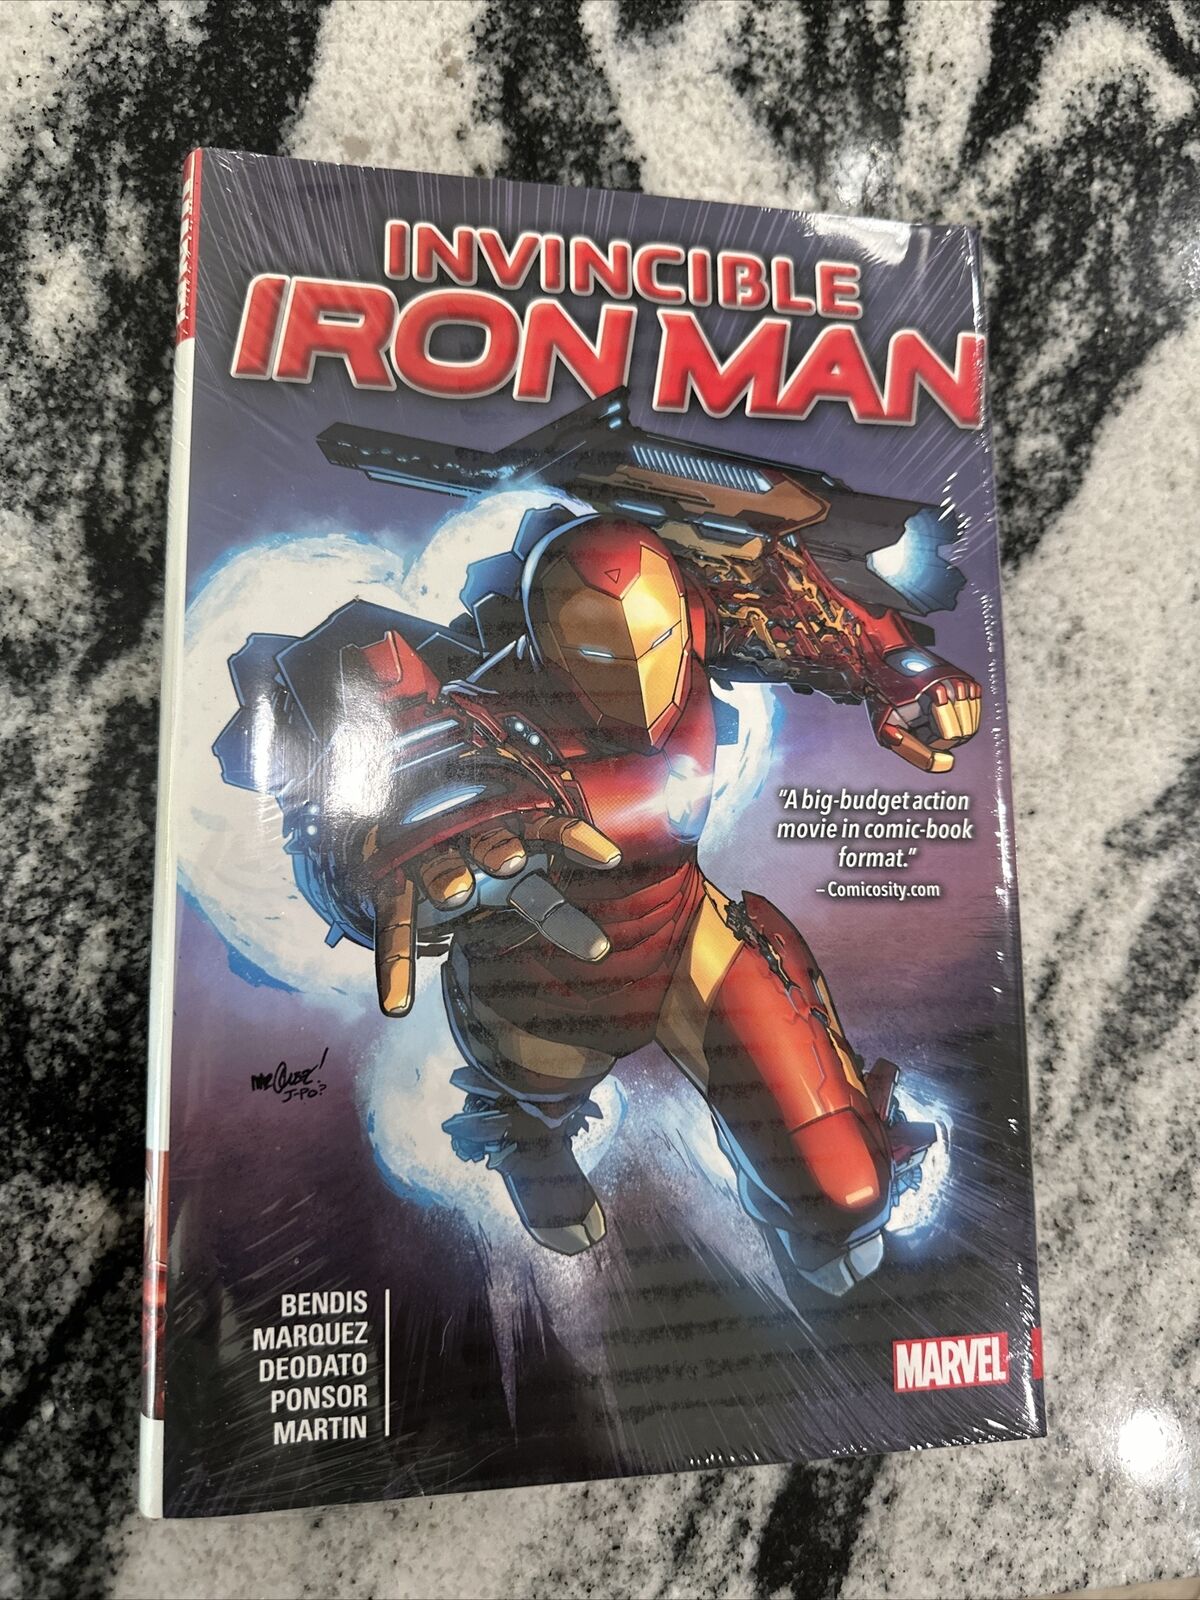 Invincible Iron Man Bendis Vol 1 (Collects Issues 1-14) OHC NEW Sealed Hardcover